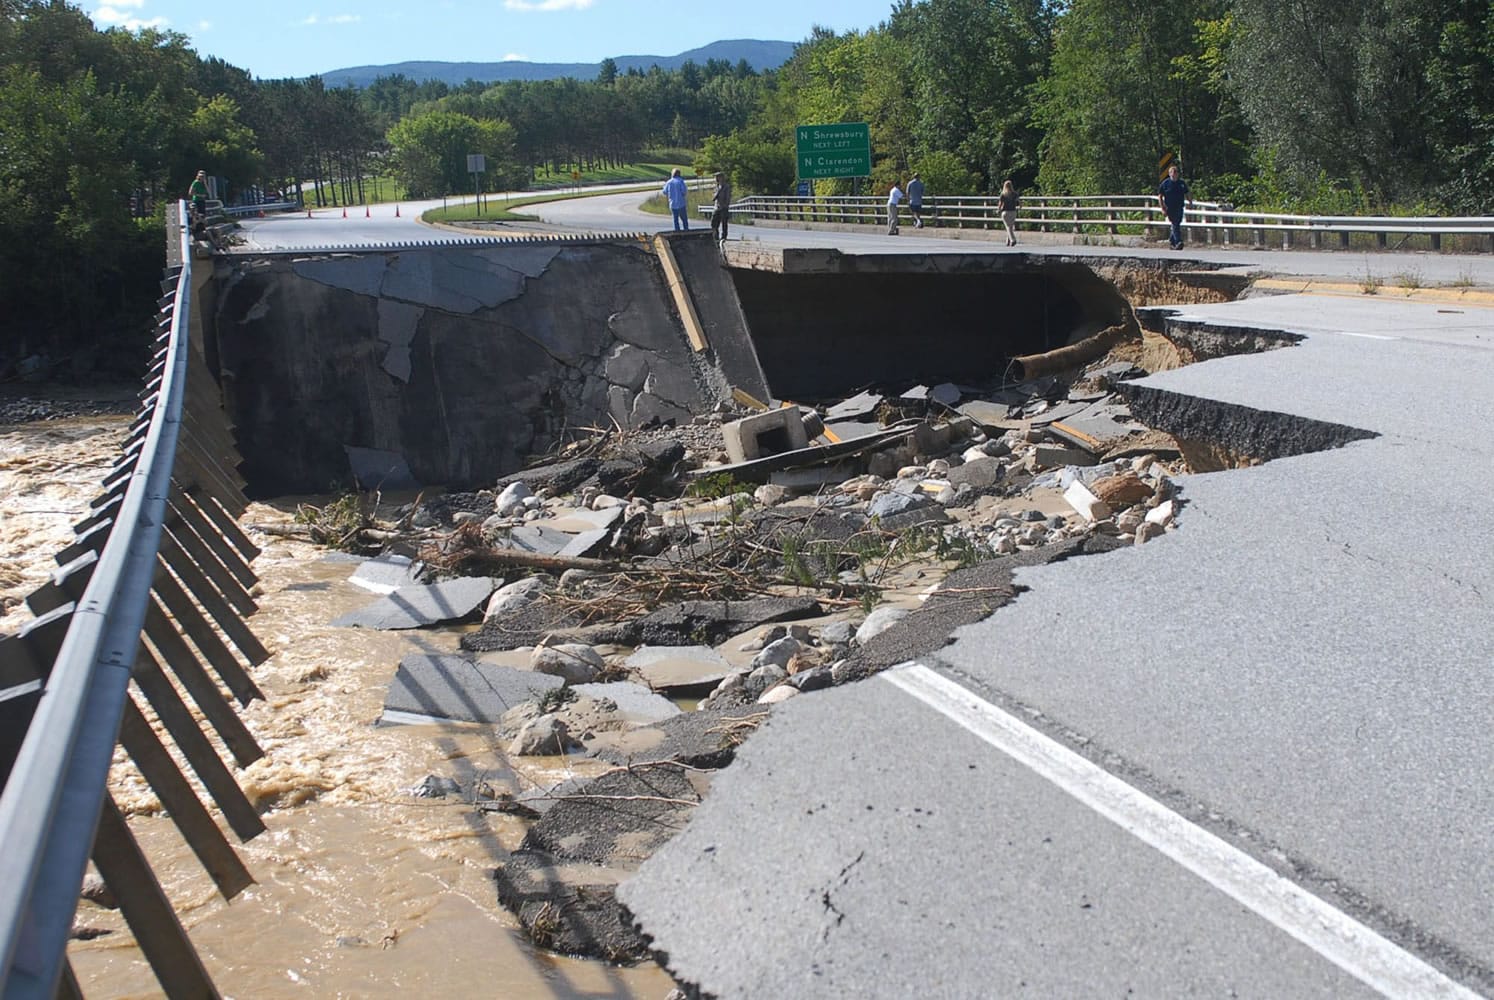 People take photos of a washed-out section of Route 7 south of Rutland, Vt., Monday, following heavy rains from Tropical Storm Irene that swelled rivers the day before.